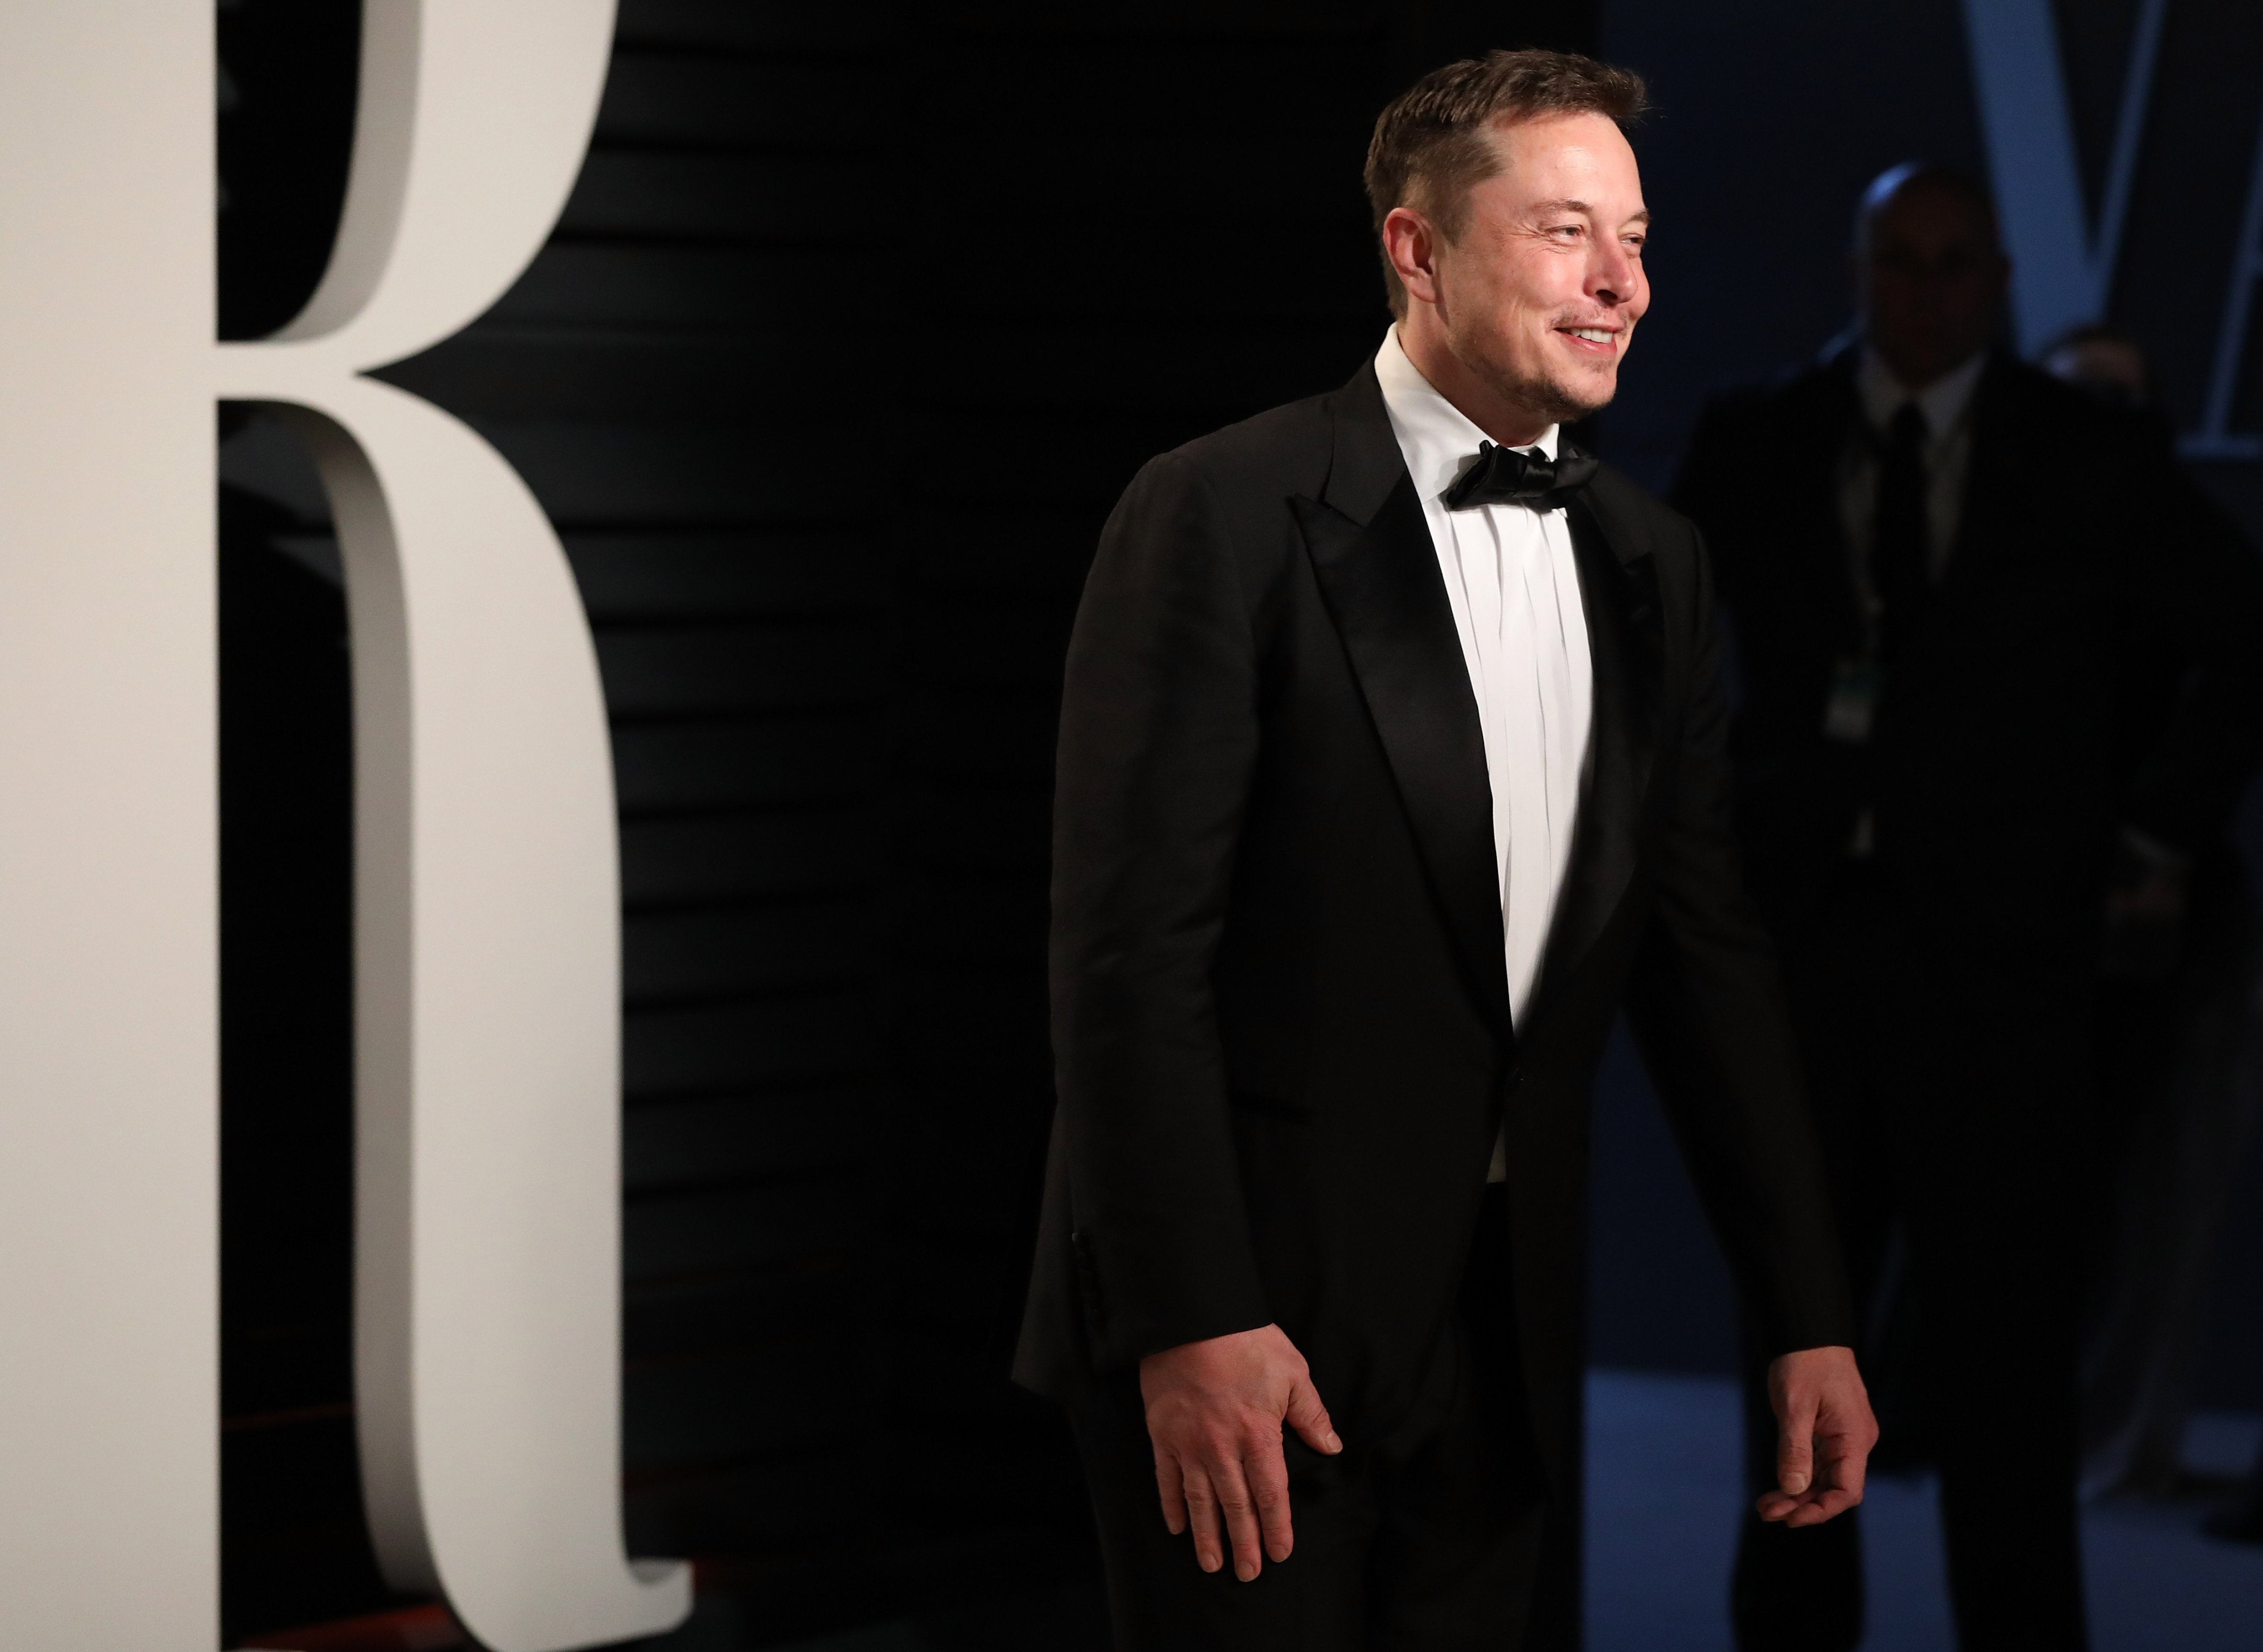 SpaceX CEO Elon Musk attends 2017 Vanity Fair Oscar Party Hosted By Graydon Carter  at Wallis Annenberg Center for the Performing Arts on February 26, 2017 in Beverly Hills, California. (Taylor Hill—Getty Images)